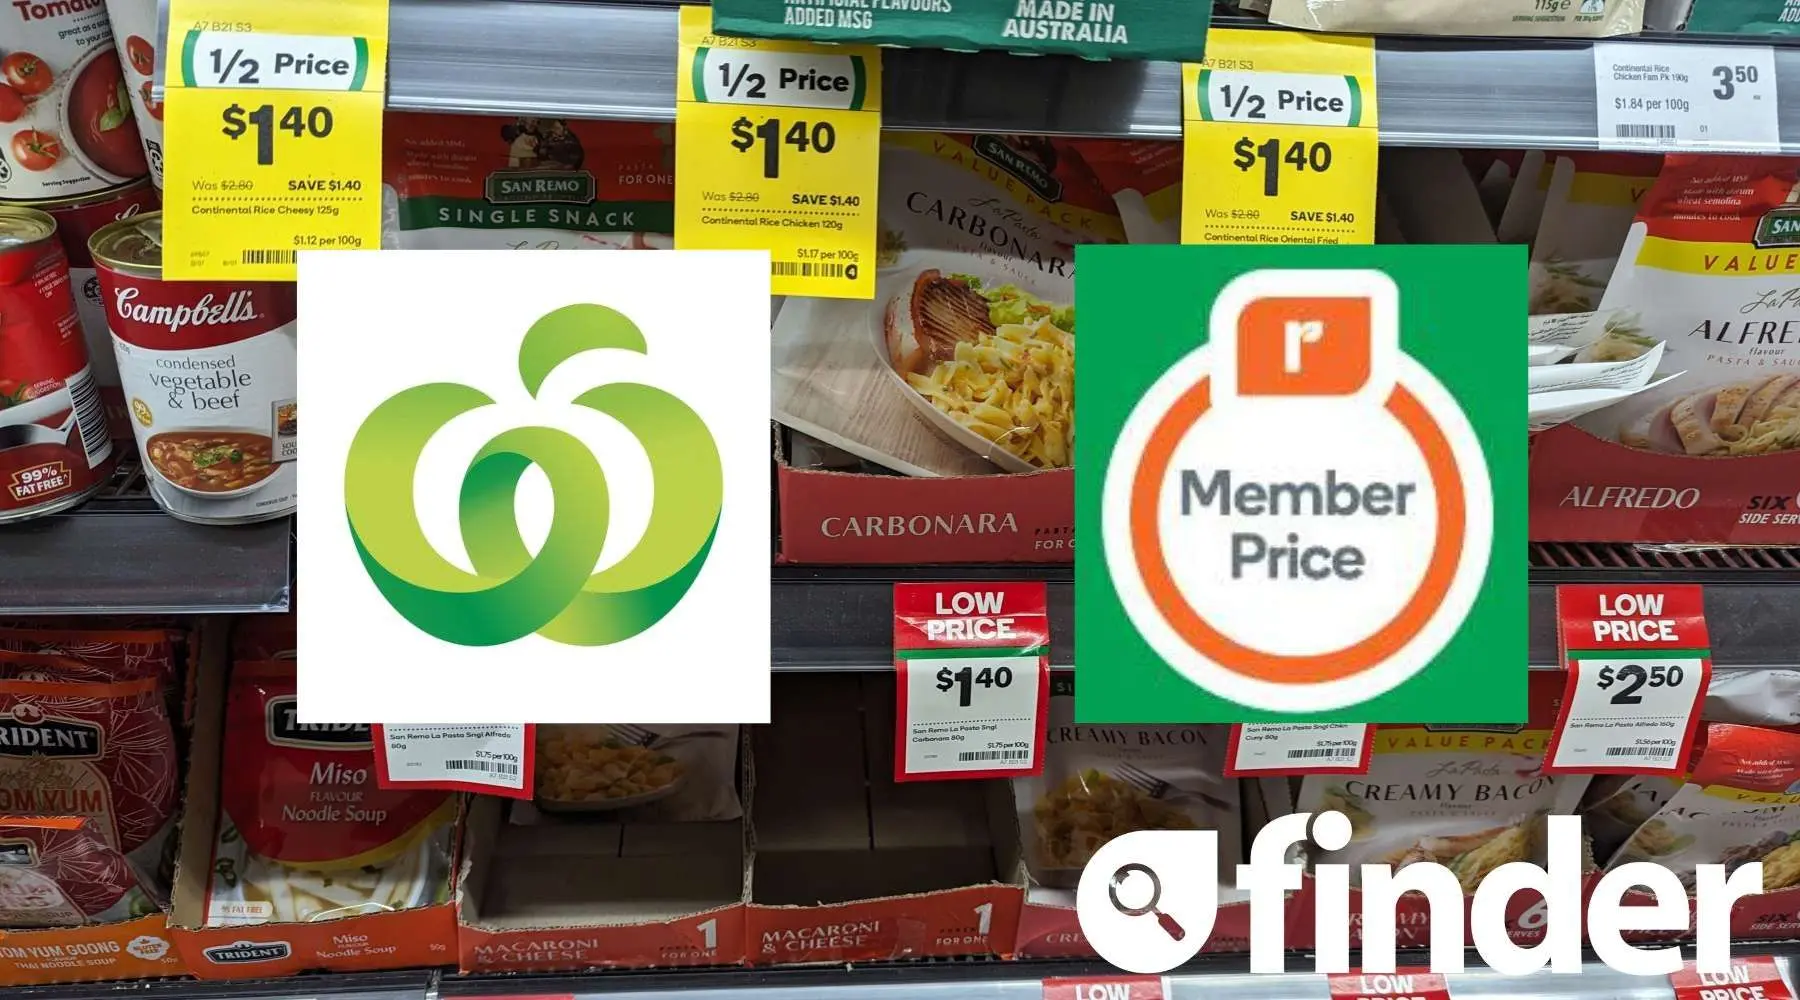 WOOLWORTHS - WRewards exclusive! Get 3 for the price of 2 when you